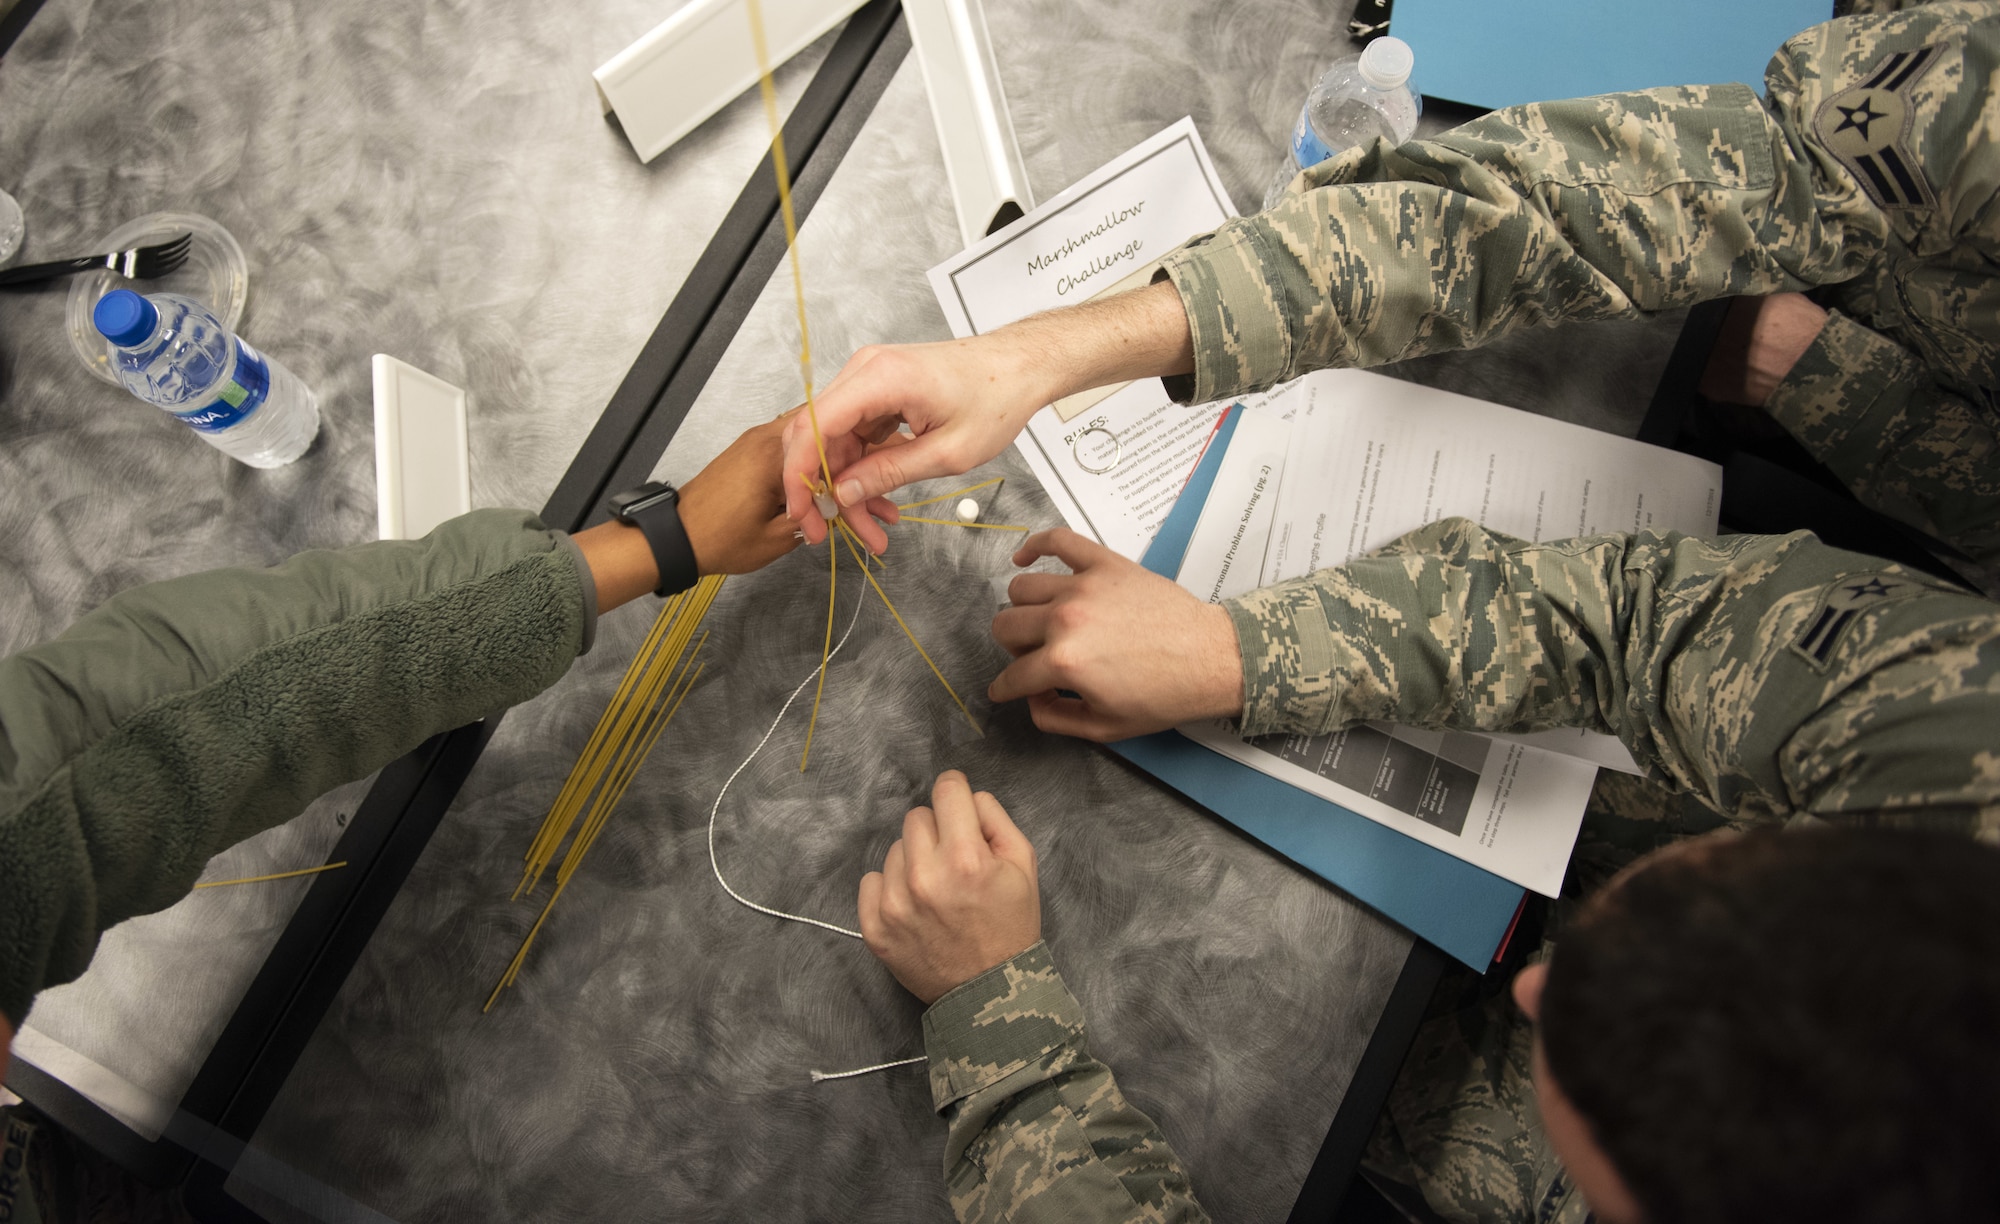 Airmen in the First Term Airman Course class work together during a competition Jan. 10, 2018, at Travis Air Force Base, Calif. Airmen attend FTAC to help transition from the technical training atmosphere to the operational Air Force. (U.S. Air Force photo by Airman 1st Class Jonathon Carnell)